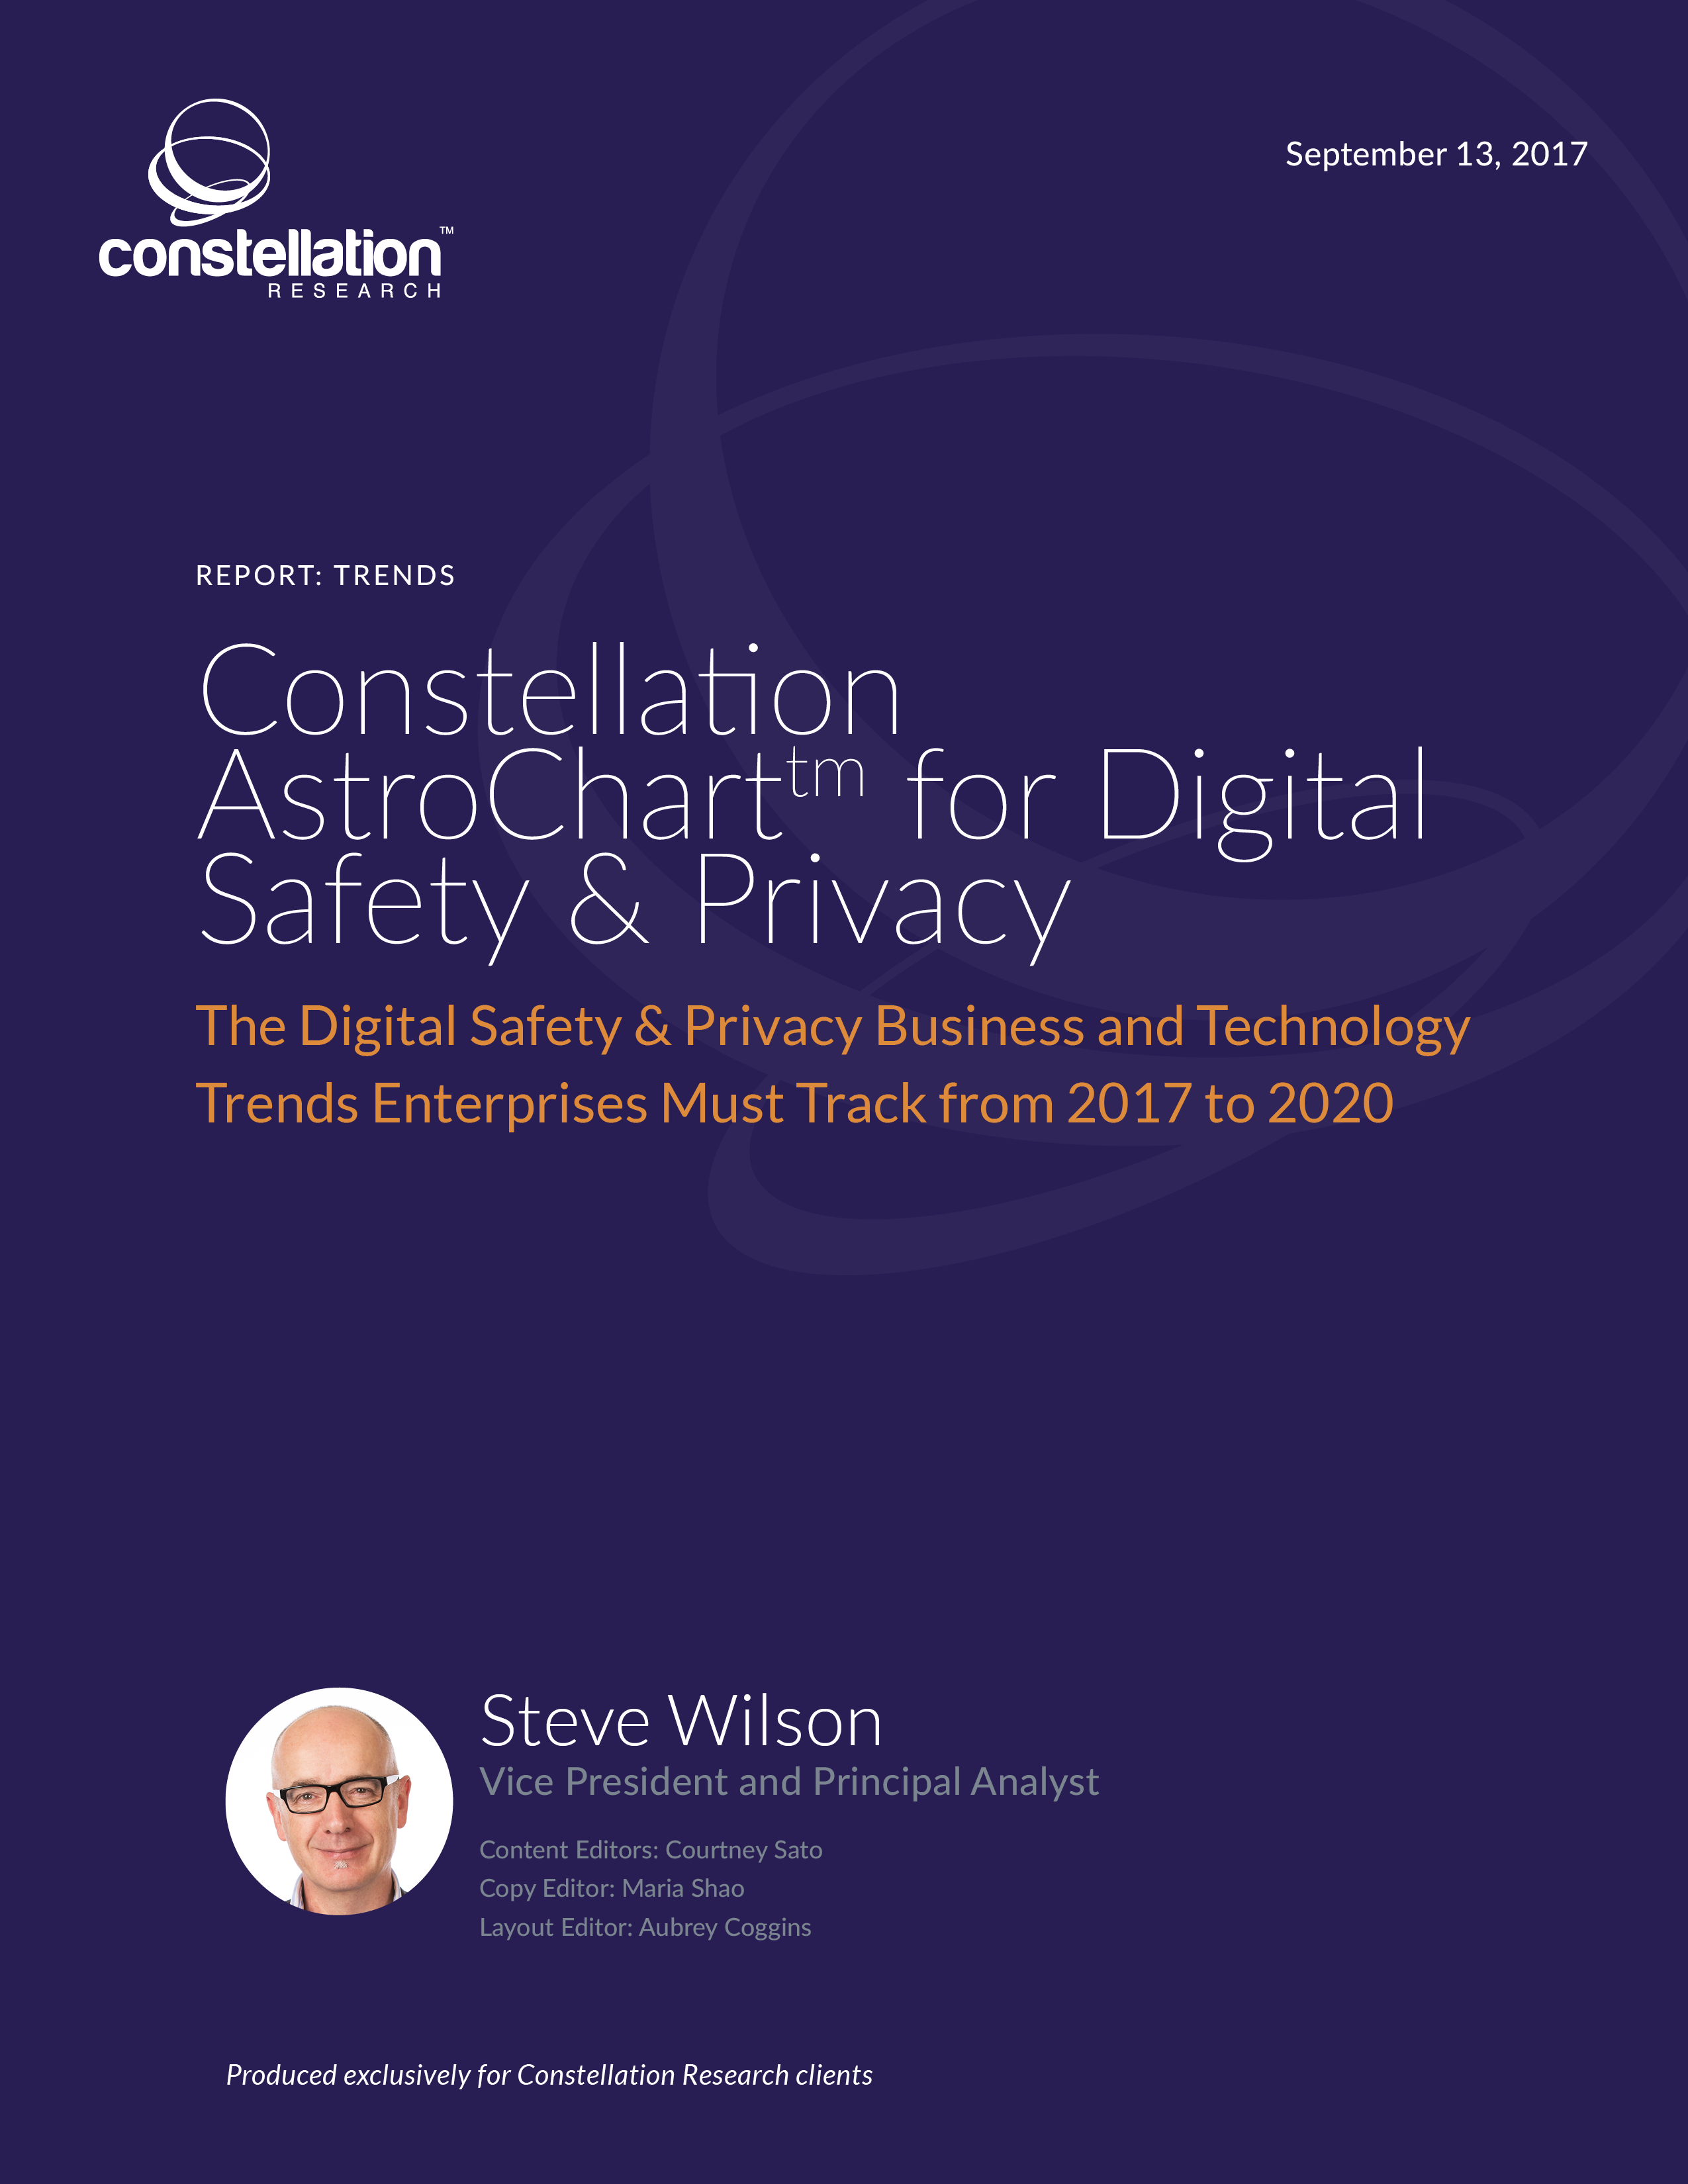 Constellation Astrochart for Digital Safety and Privacy Trends